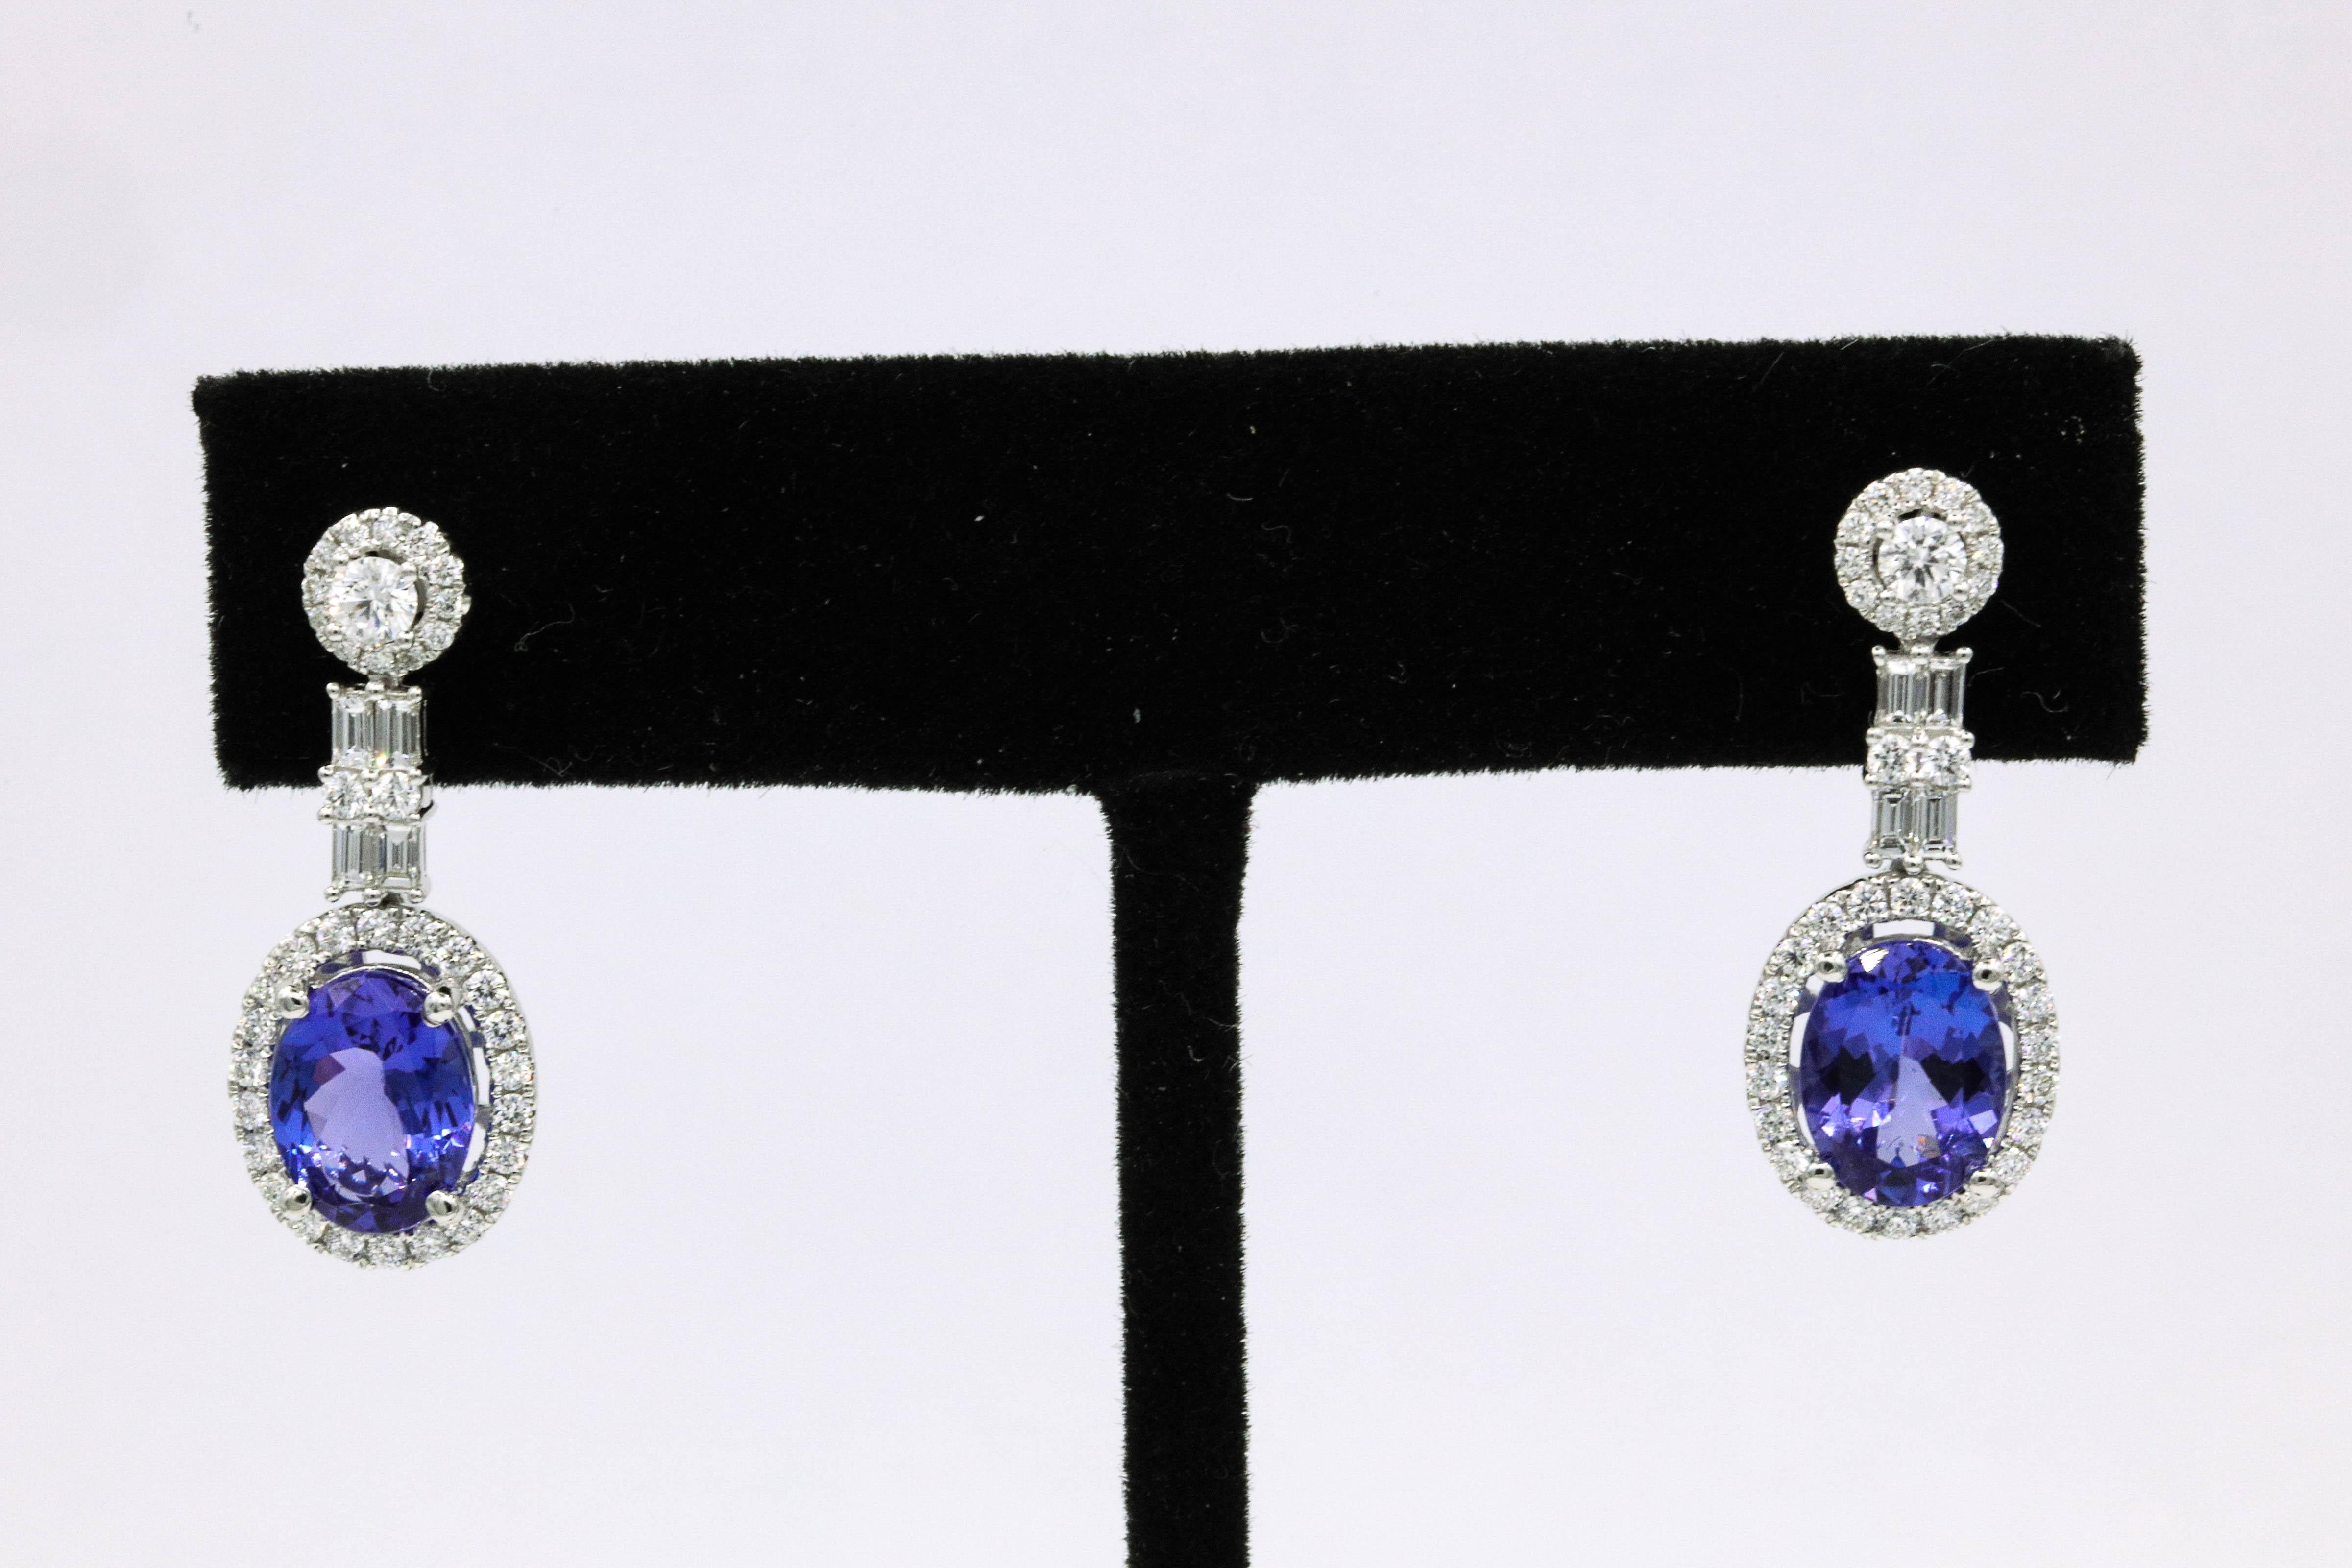 18K White gold drop earrings featuring two oval shape tanzanites weighing 3.30 carats flanked with round and baguette diamonds weighing 1.13 carats.
Color G-H
Clarity SI